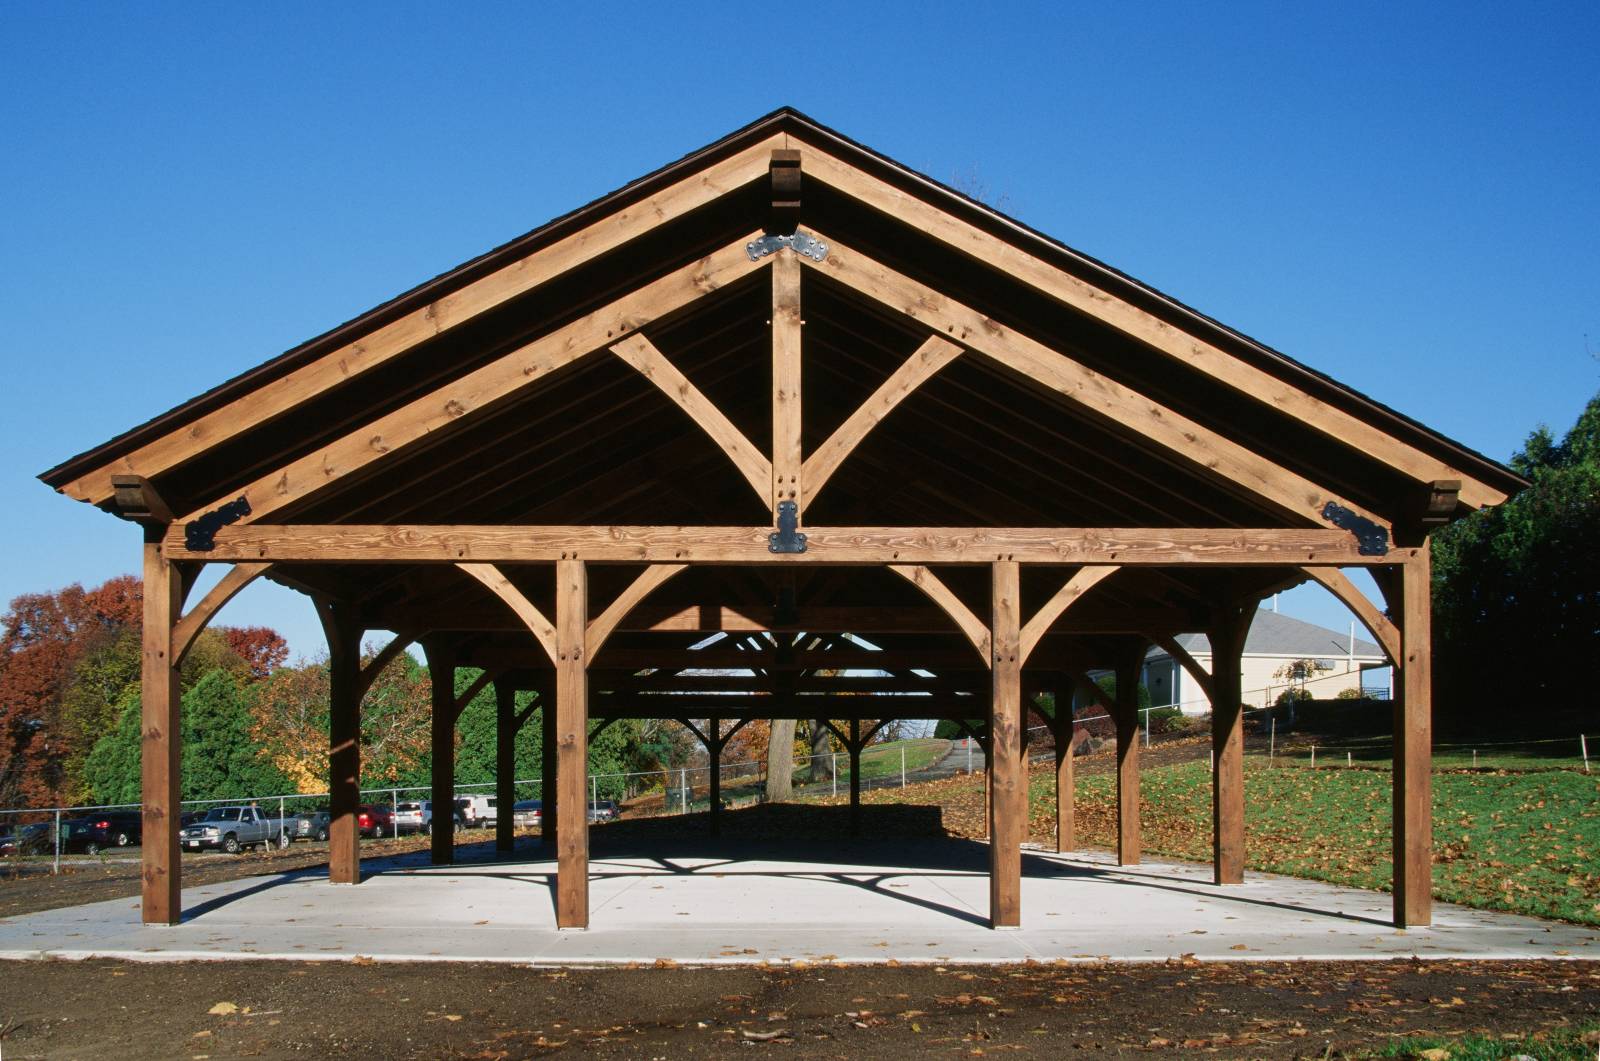 6-12 Roof Pitch • King Post Trusses • Arched Braces • Decorative Rafter Tails